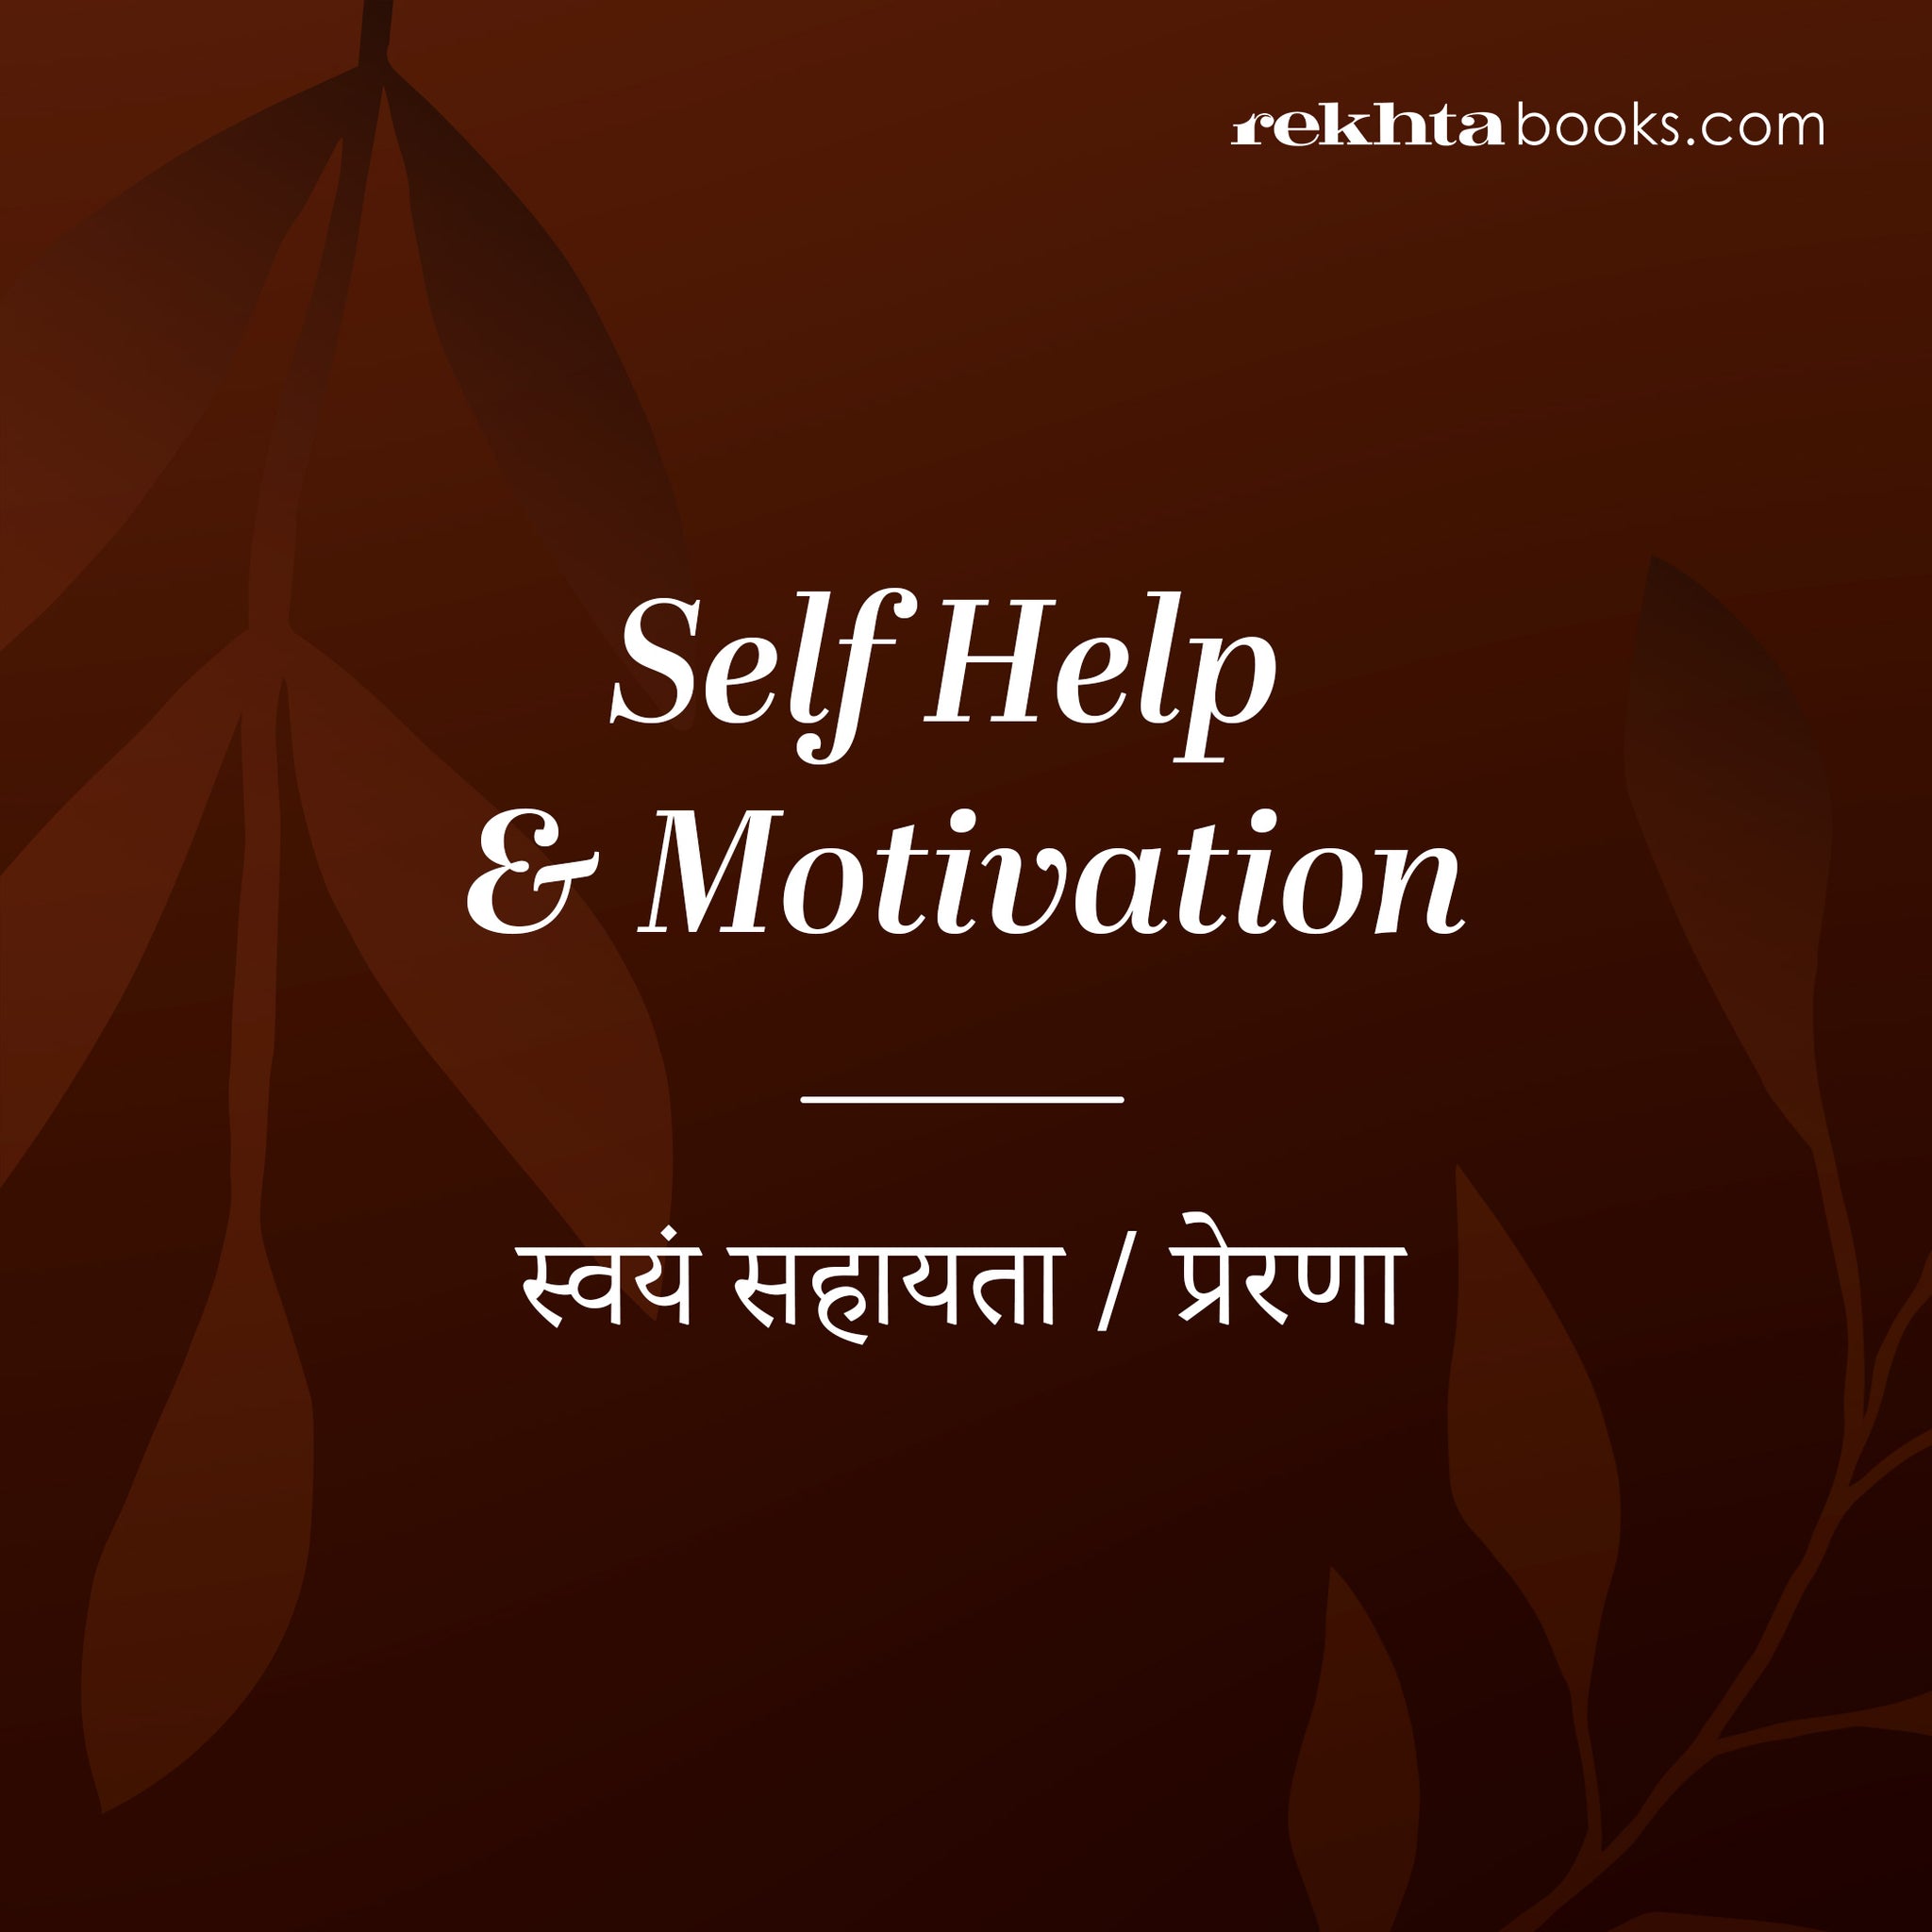 Books on self help and motivation